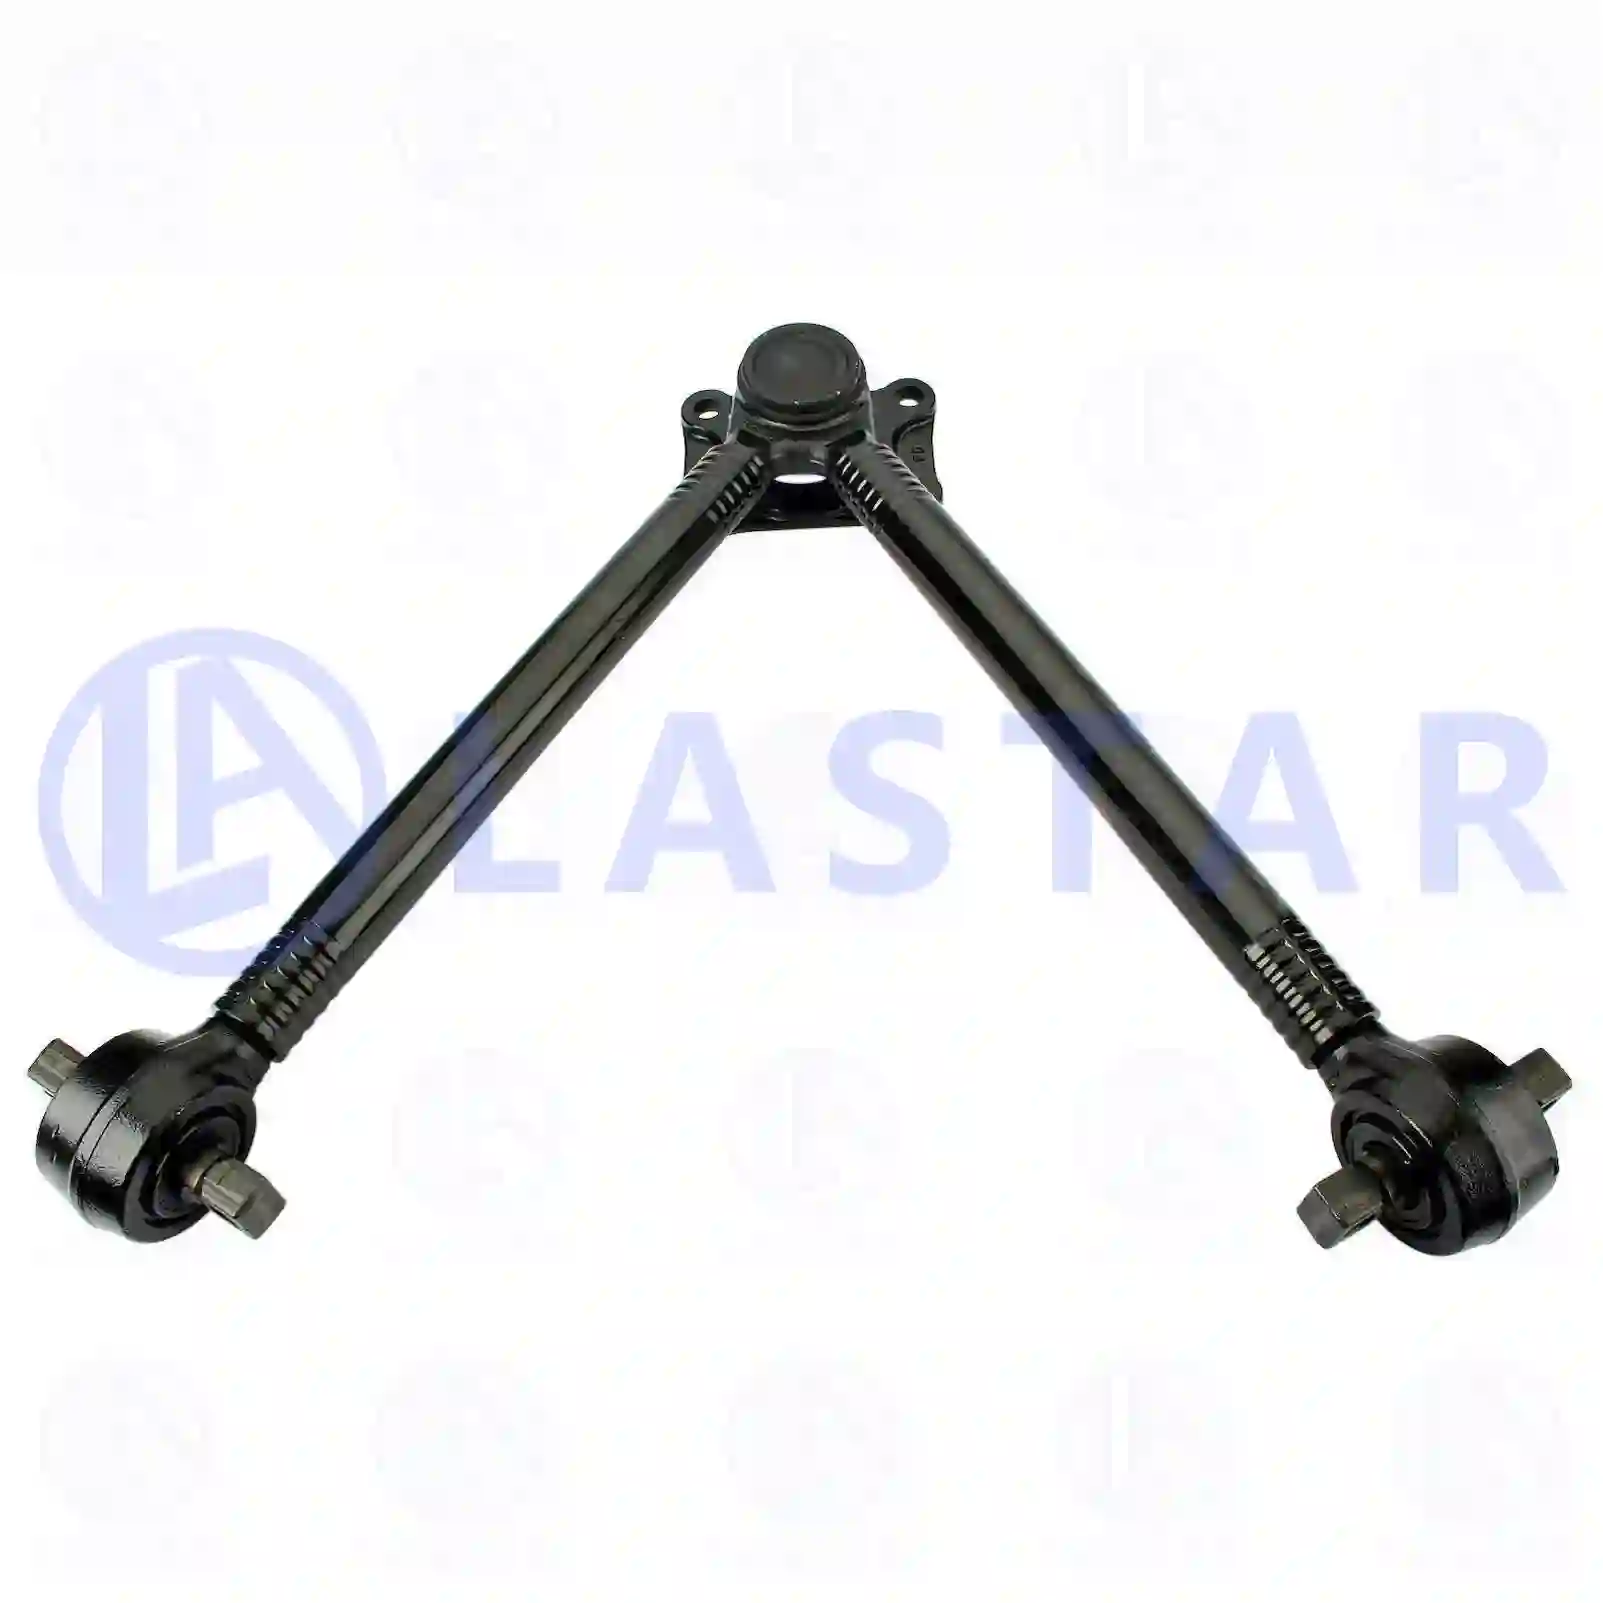 V-stay, 77727434, 1094466, 20374689, 20382314, 20502944 ||  77727434 Lastar Spare Part | Truck Spare Parts, Auotomotive Spare Parts V-stay, 77727434, 1094466, 20374689, 20382314, 20502944 ||  77727434 Lastar Spare Part | Truck Spare Parts, Auotomotive Spare Parts